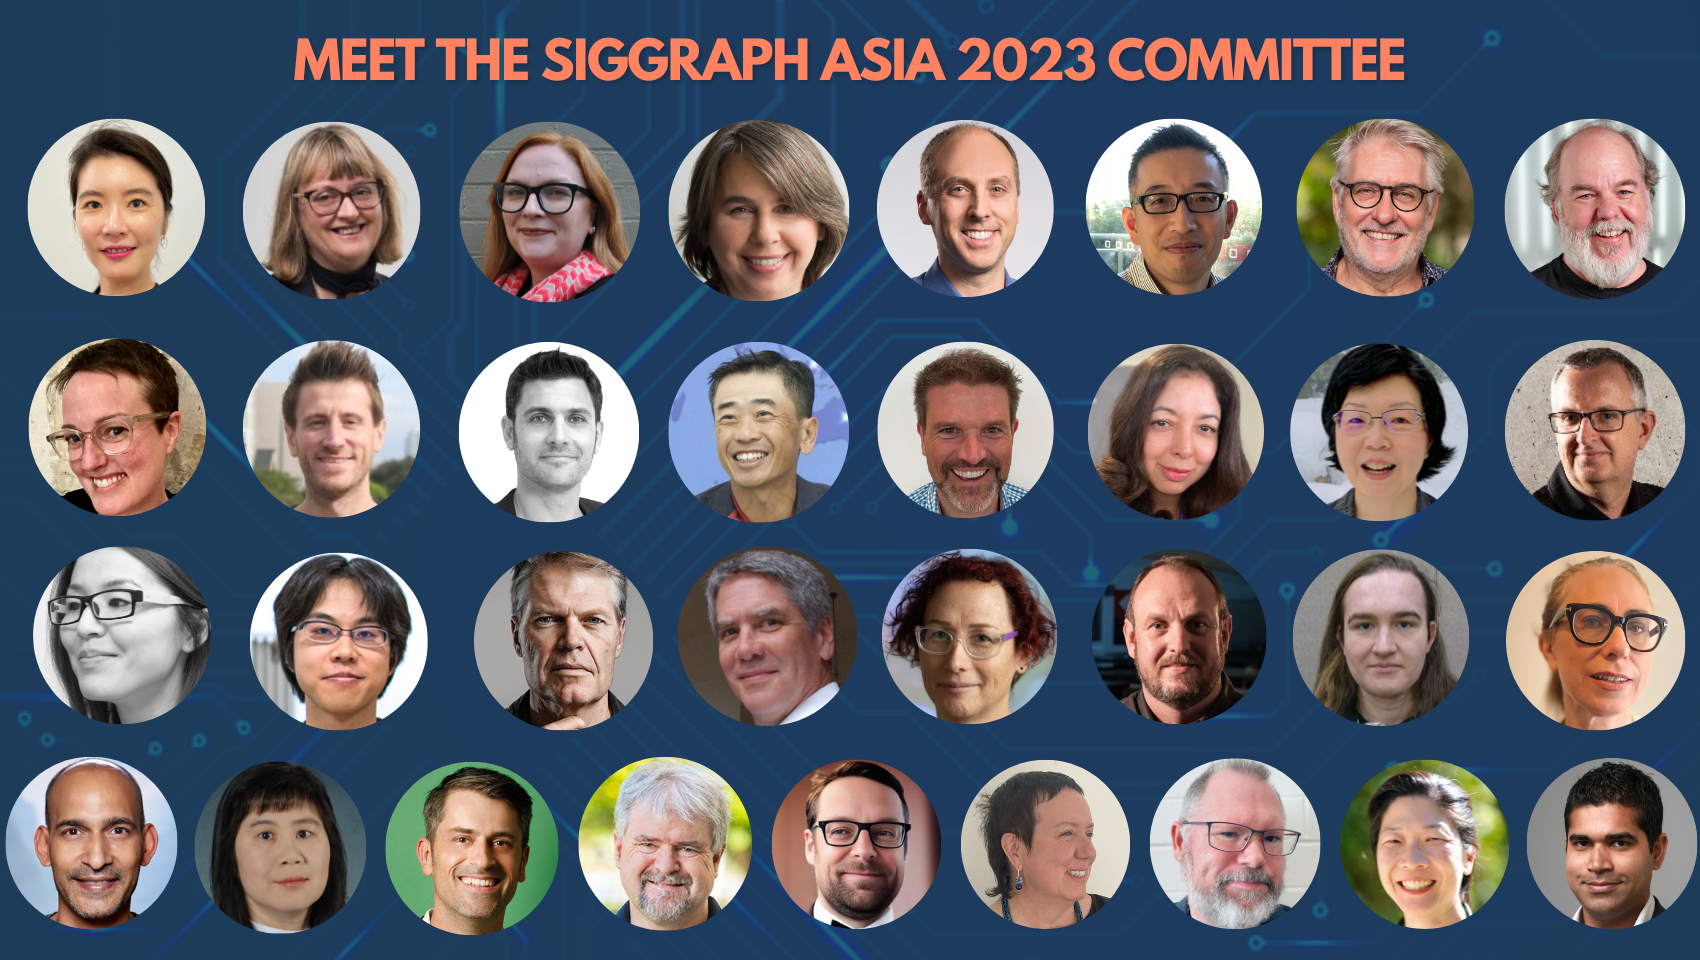 Get to Know the SIGGRAPH Asia 2023 Committee